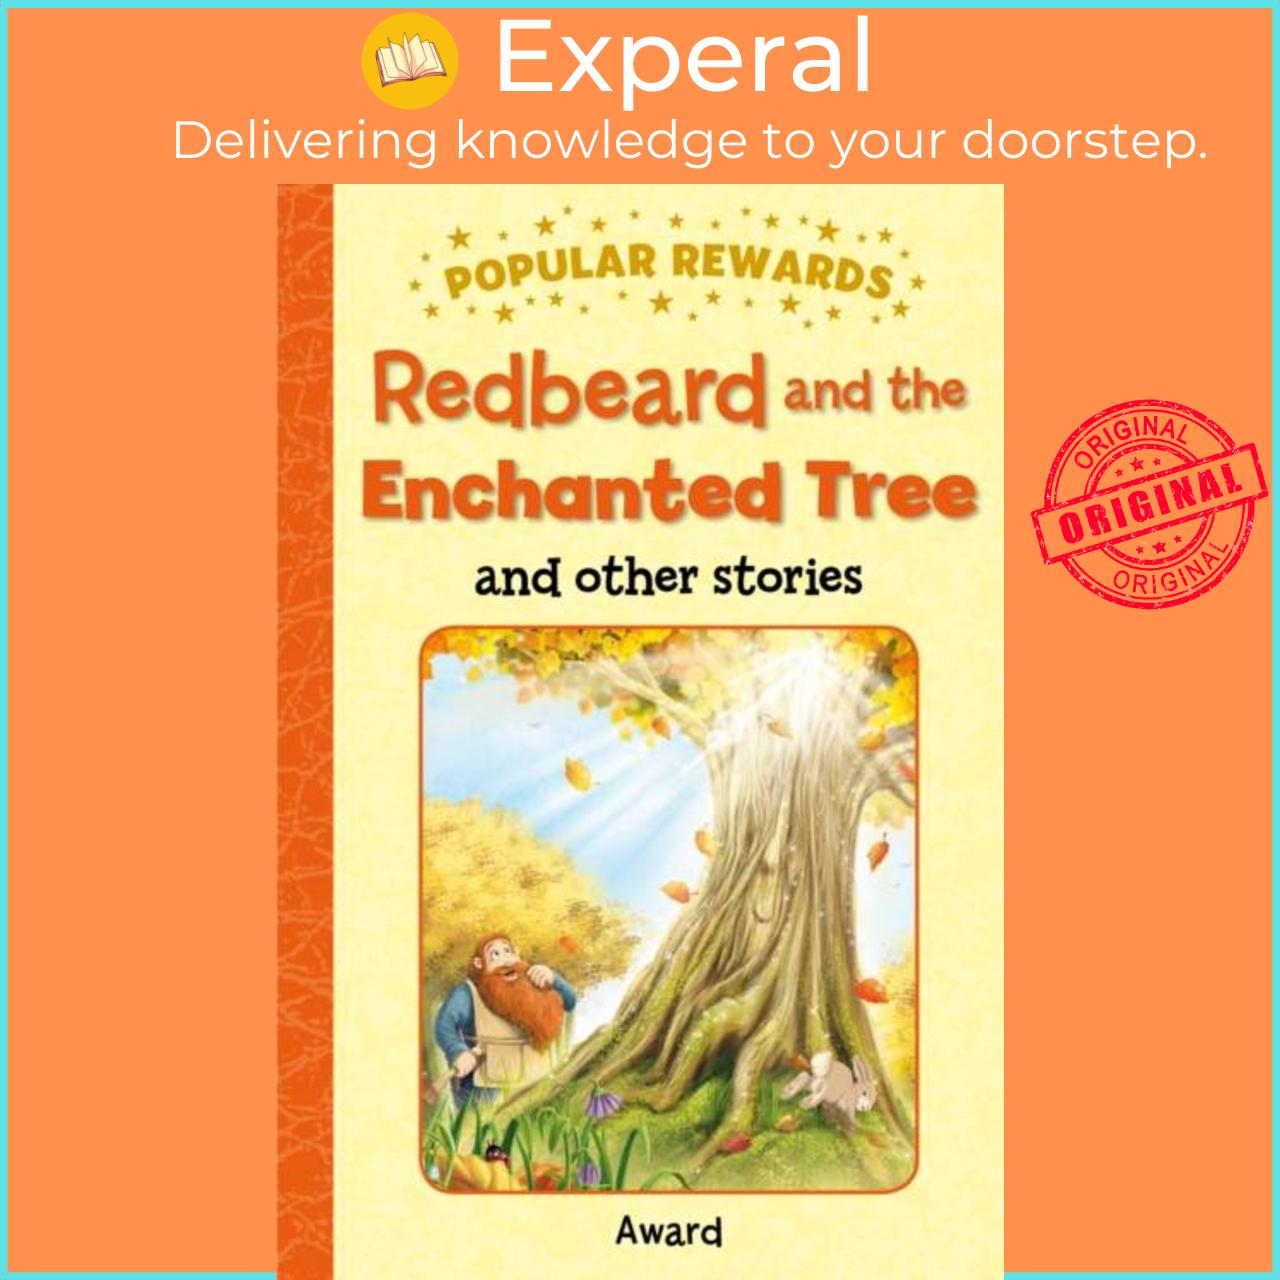 Sách - Redbeard and the Enchanted Tree by Angela Hewitt (UK edition, hardcover)